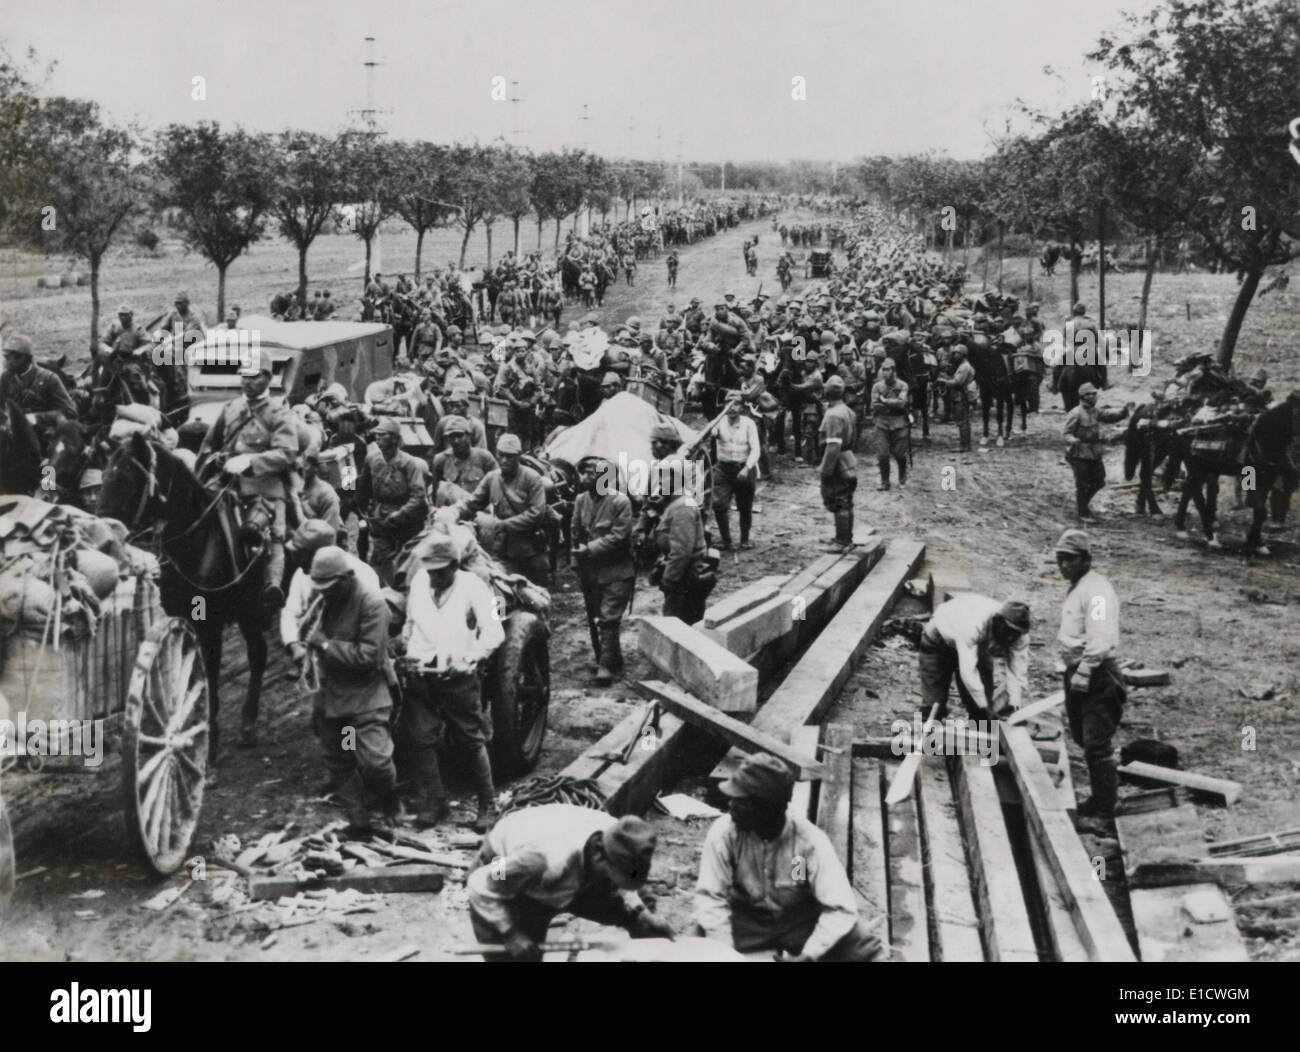 Advance of a column of Japanese Troops on route from Shanghai to Nanking, China. Aug. 12, 1937. (BSLOC 2014 7 26) Stock Photo